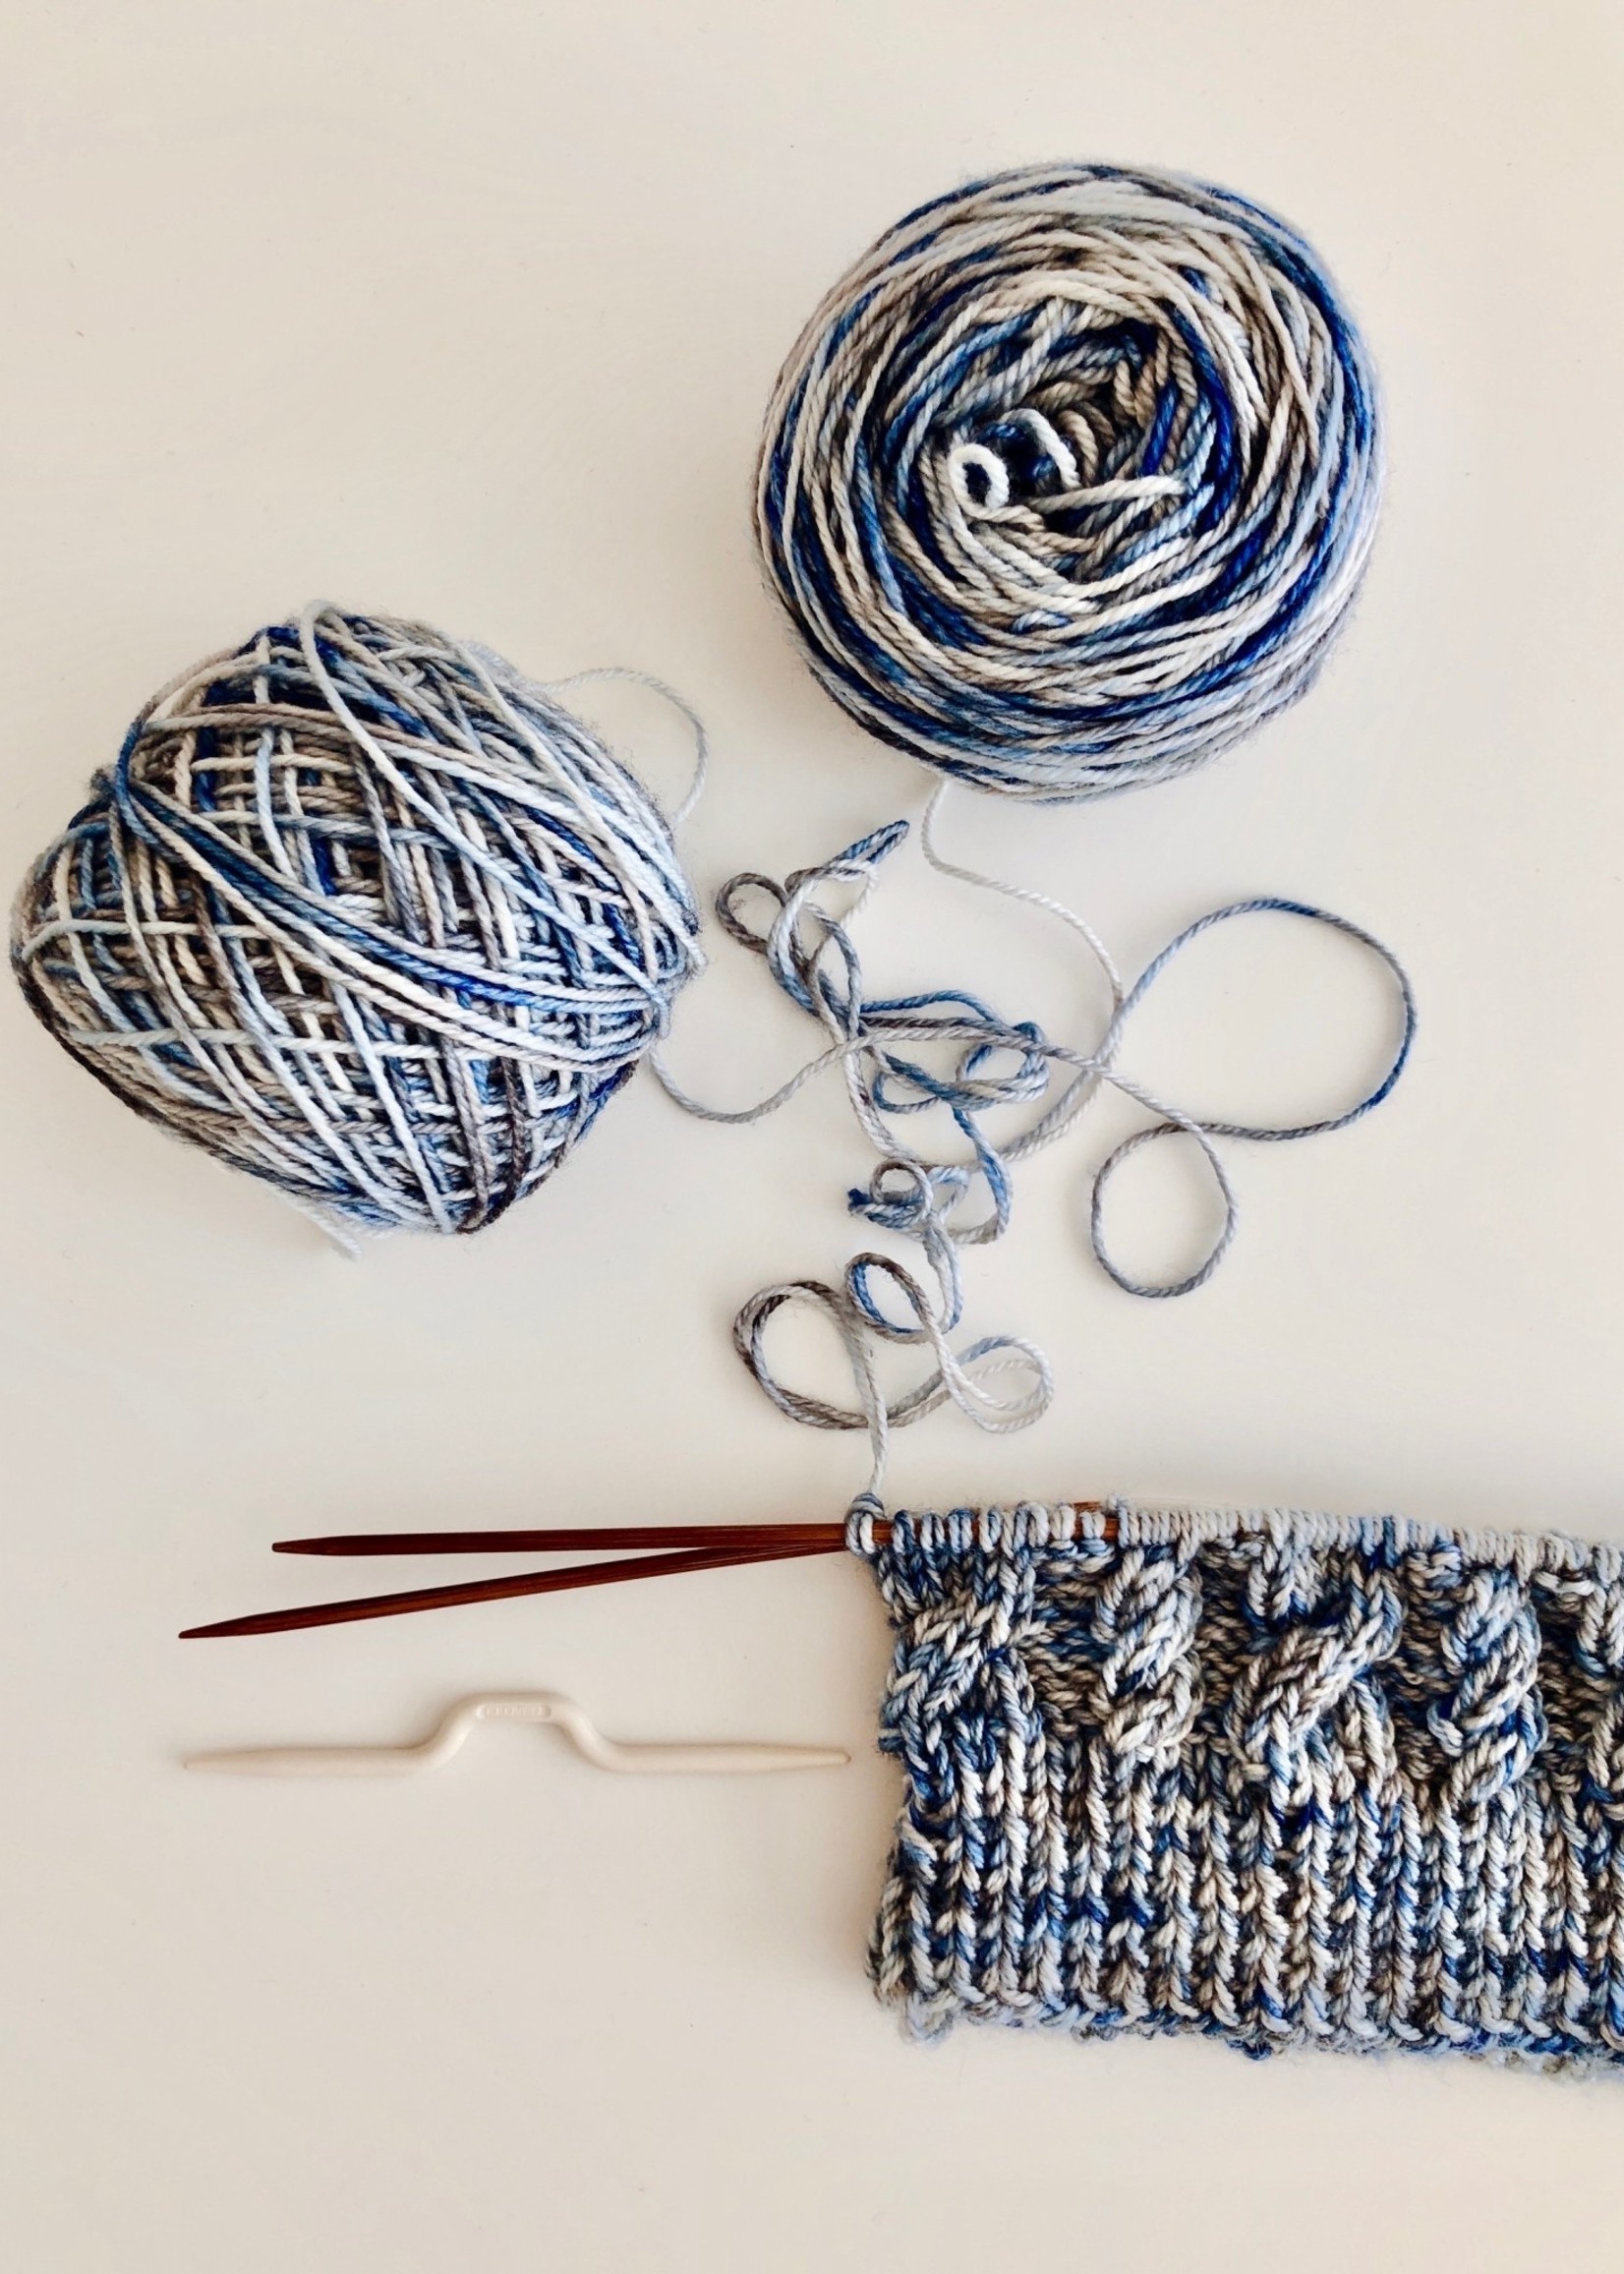 In Person - Learn to Knit Part 1